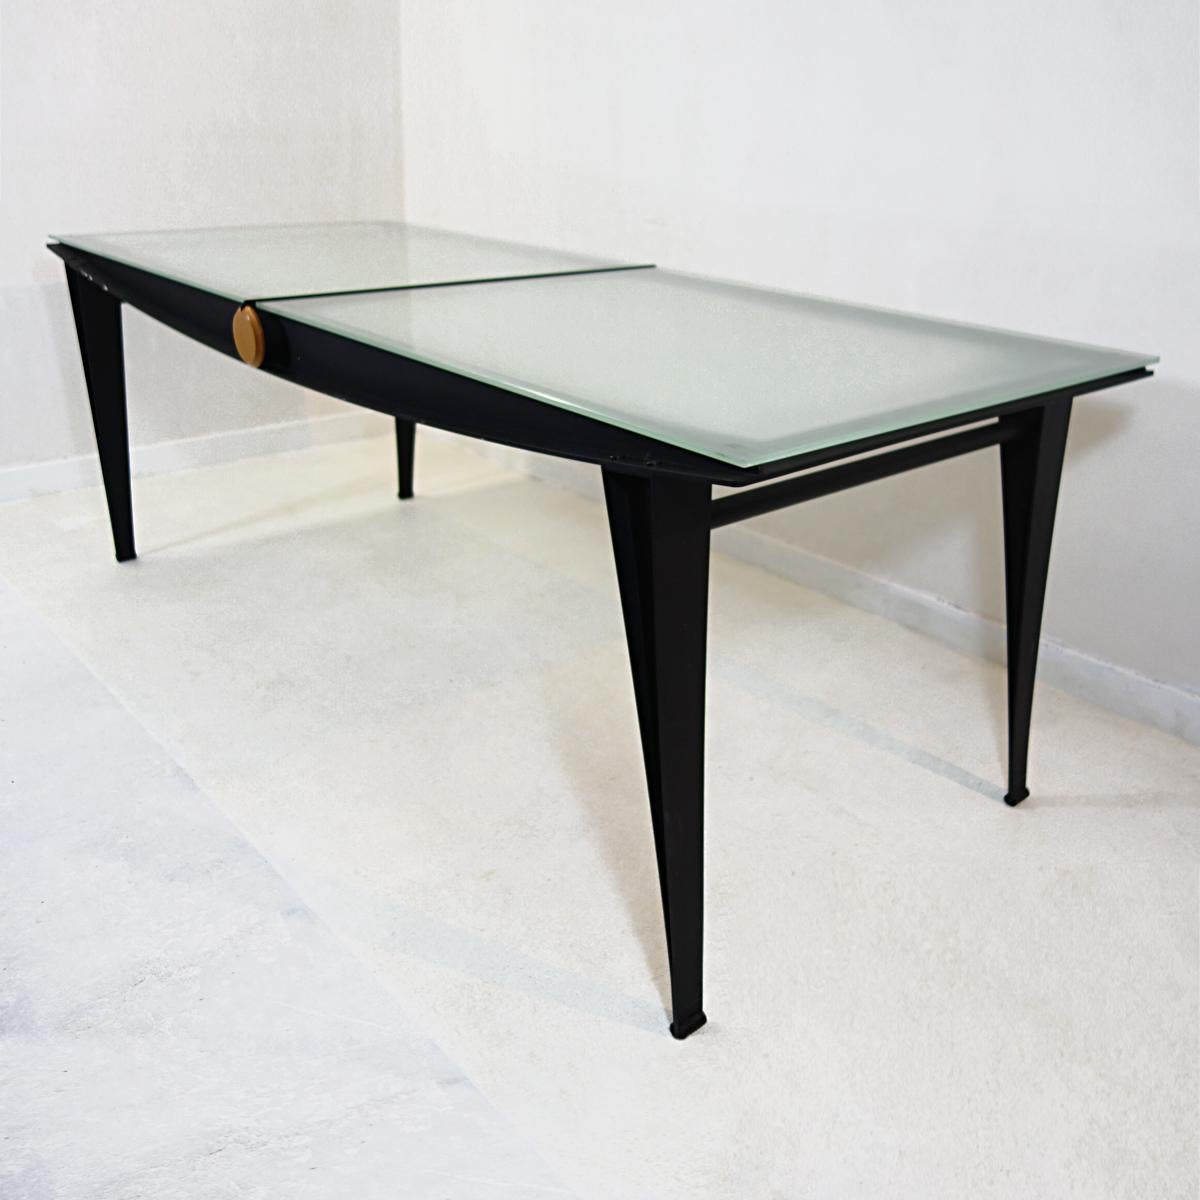 Very elegant dining table that makes a clear architectural statement with its wonderfully detailed black steel frame. The top consists of two glass plates that have been sandblasted.
A cute detail is the round drawer made of wood that made be used